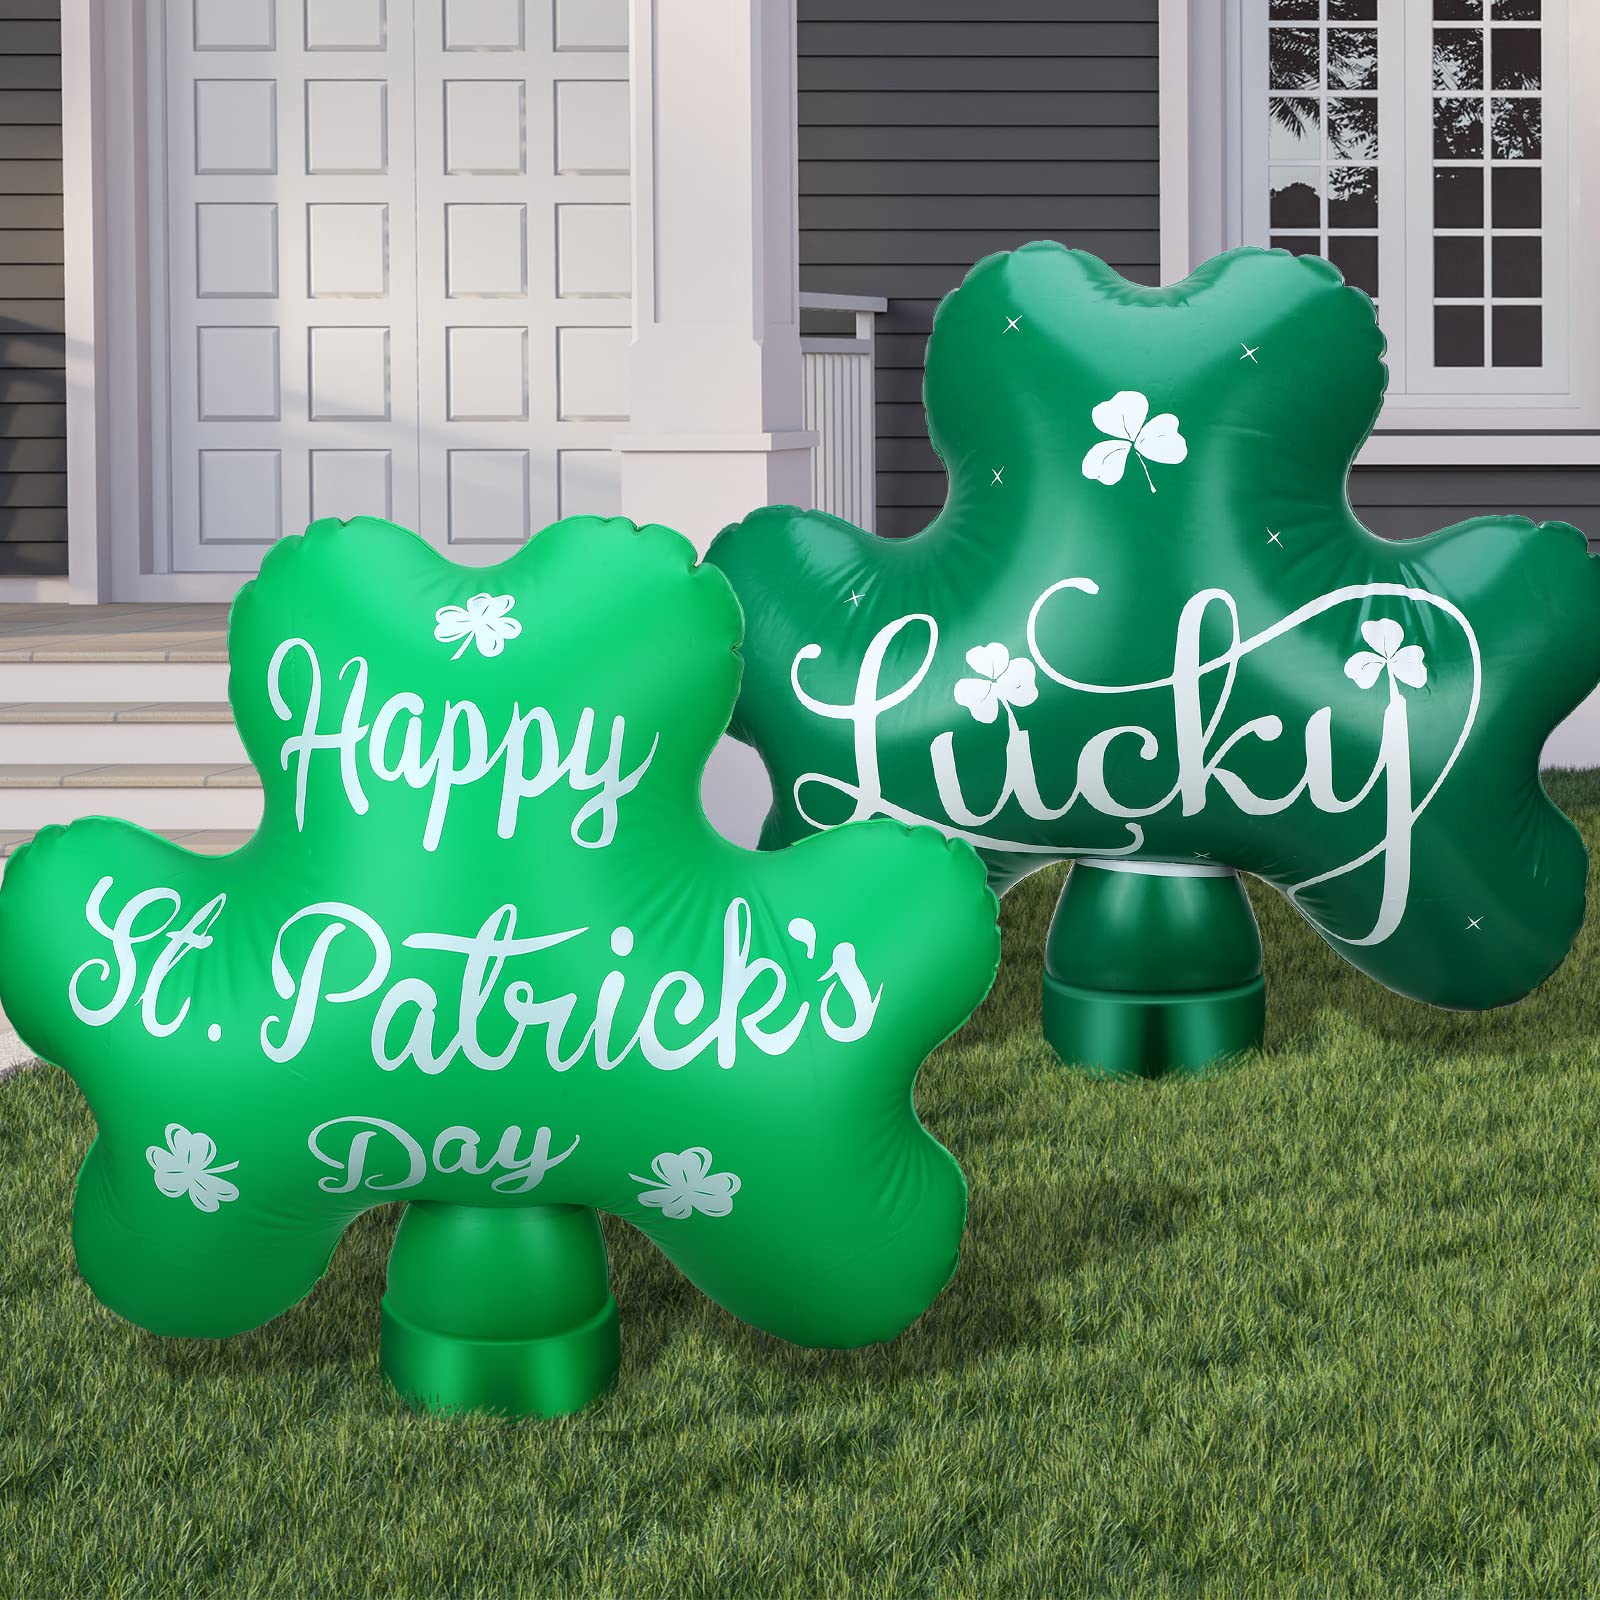 Jetec 2 Pcs 24 Inch St Patricks Day Inflatable Decorations Inflatable Shamrock Outdoor Decoration Lucky Day Indoor Outdoor Blow Up Yar